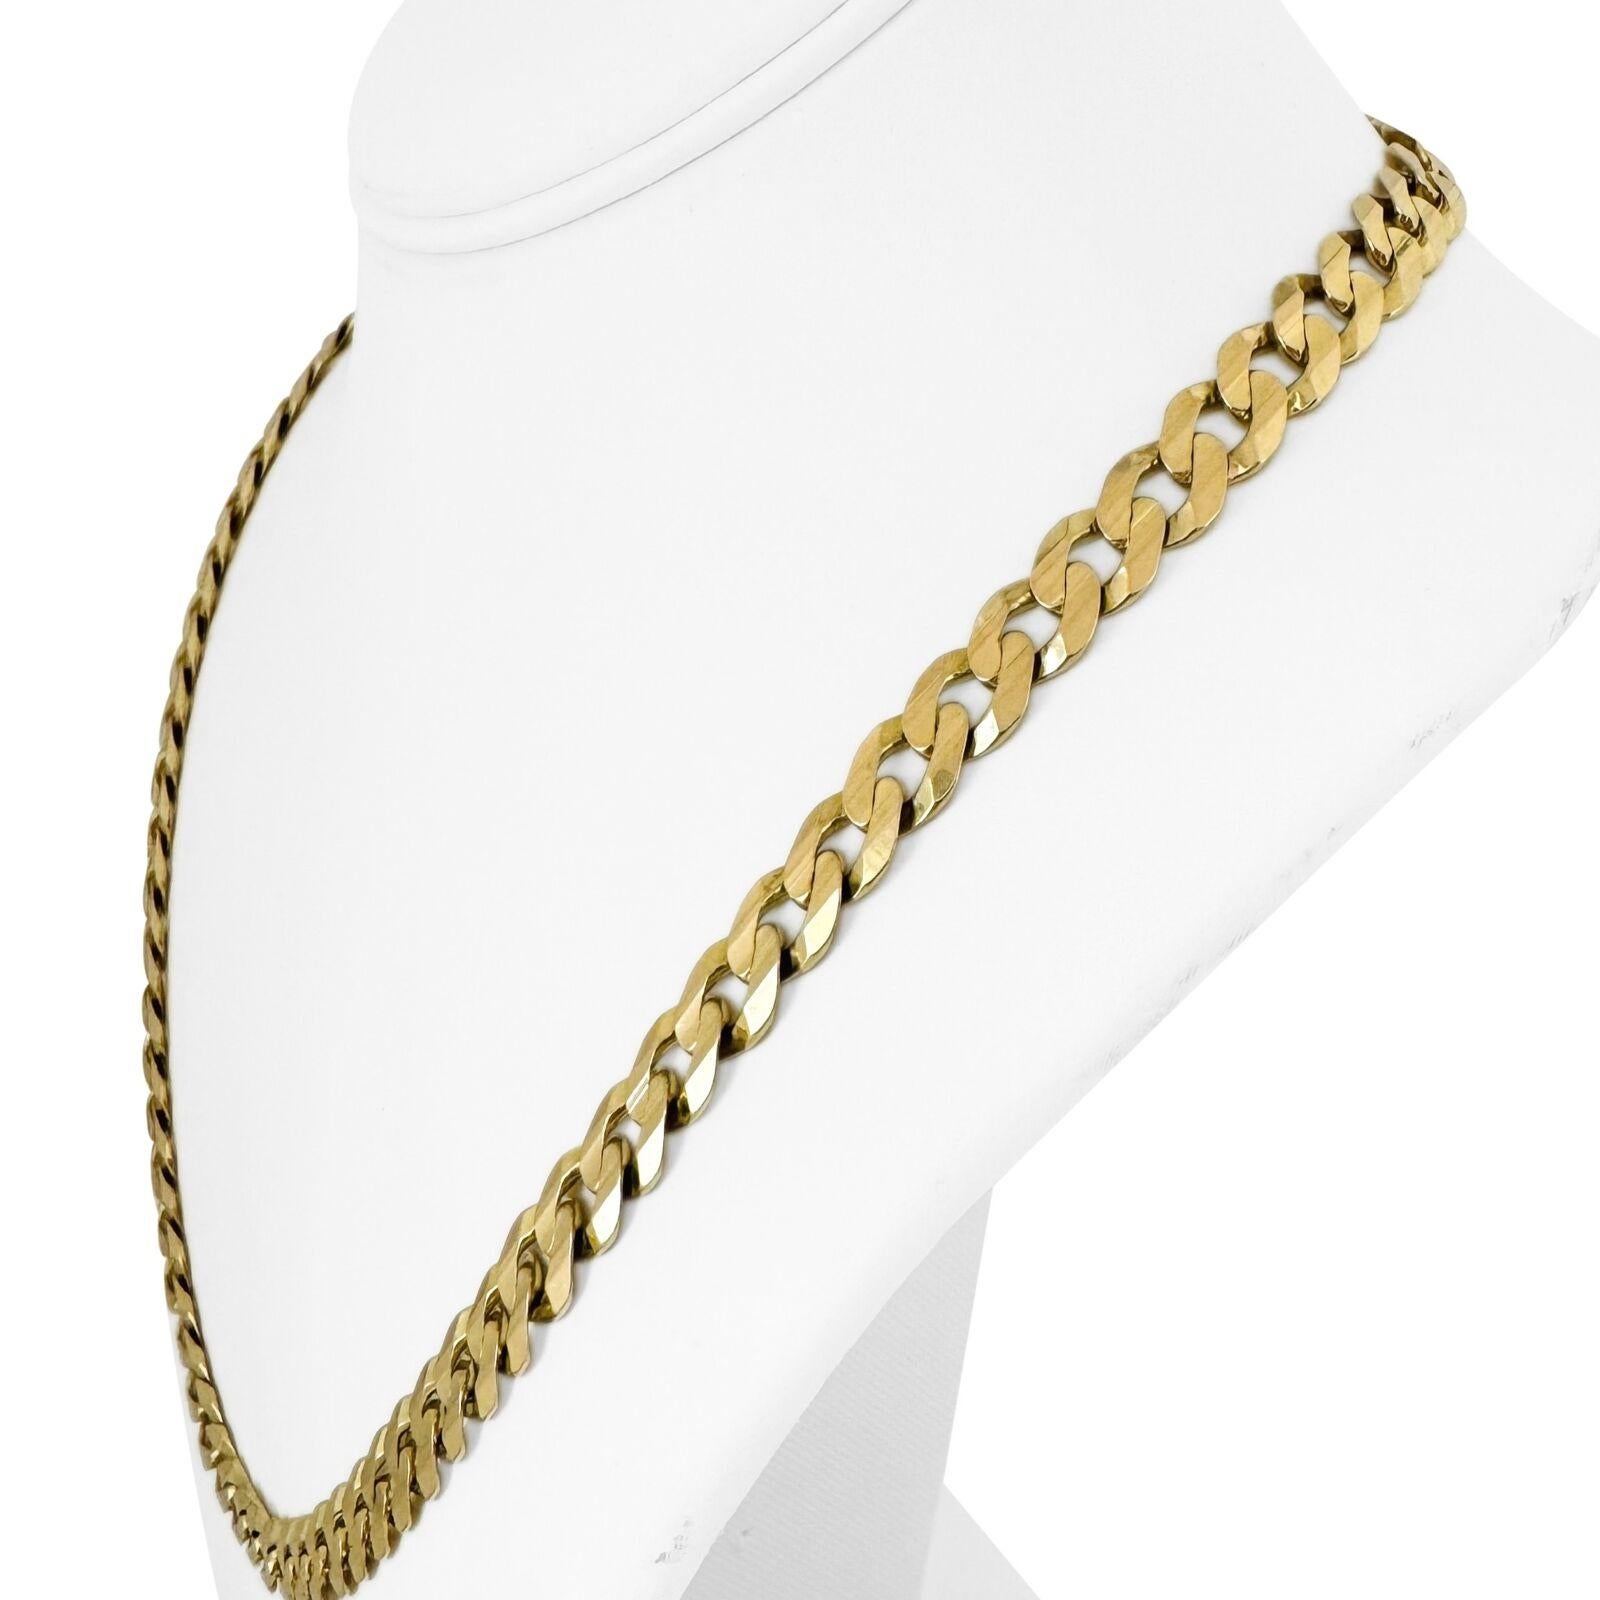 10k Yellow Gold 46.6g Solid Men's 8mm Curb Link Chain Necklace Turkey 22